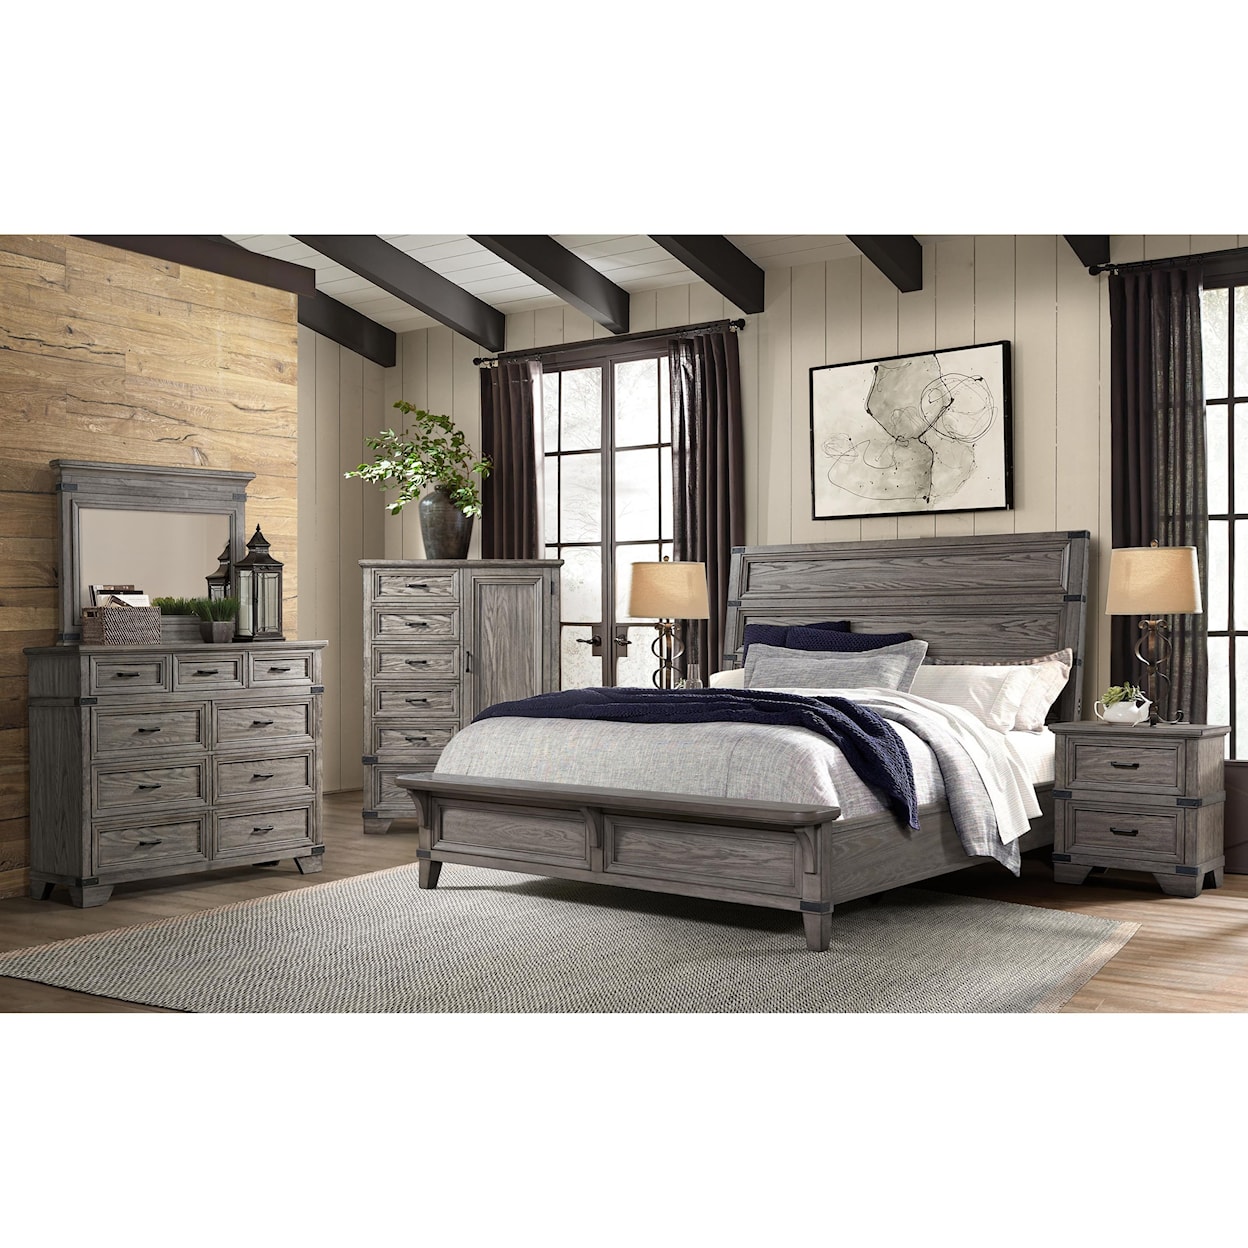 Intercon Forge King Bedroom Group